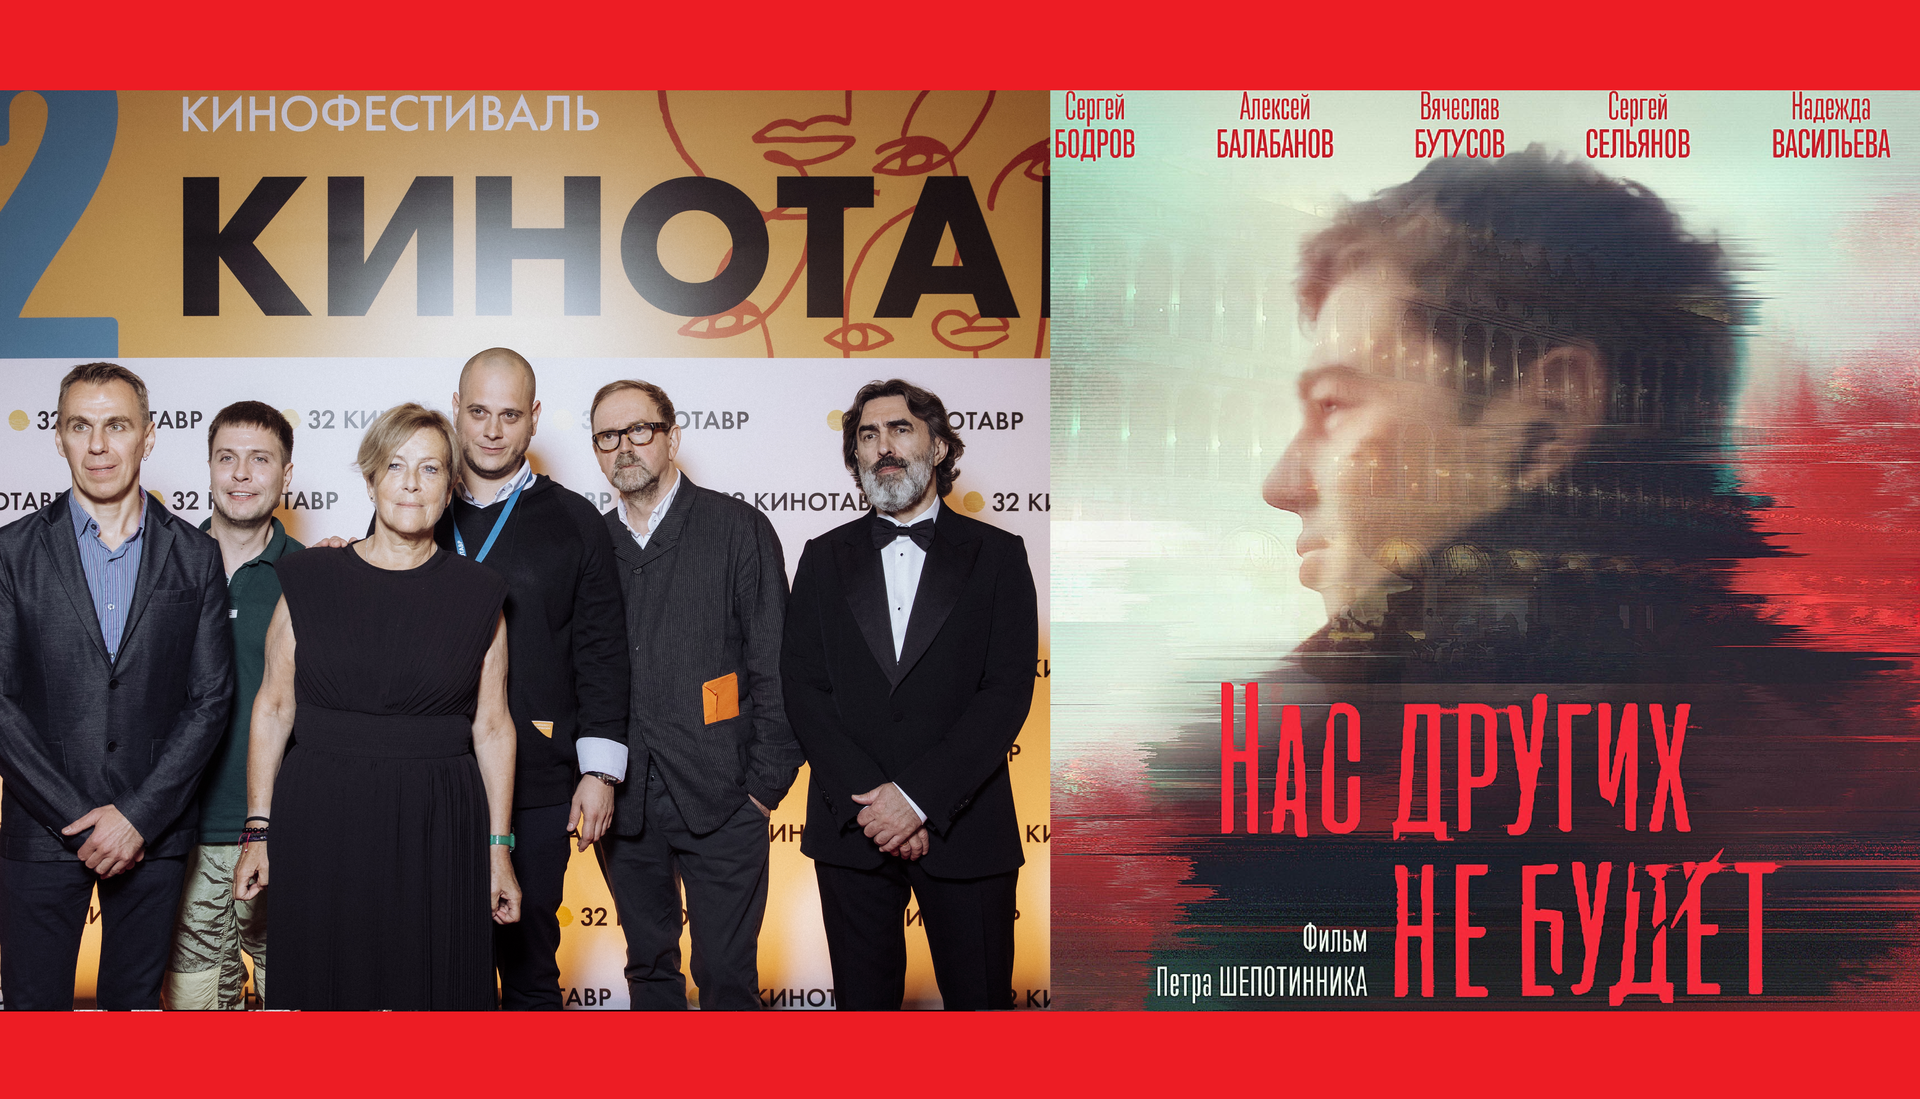 "There will be no others for us": a film about Sergey Bodrov Jr. became the film of "Kinotavr" festival opening